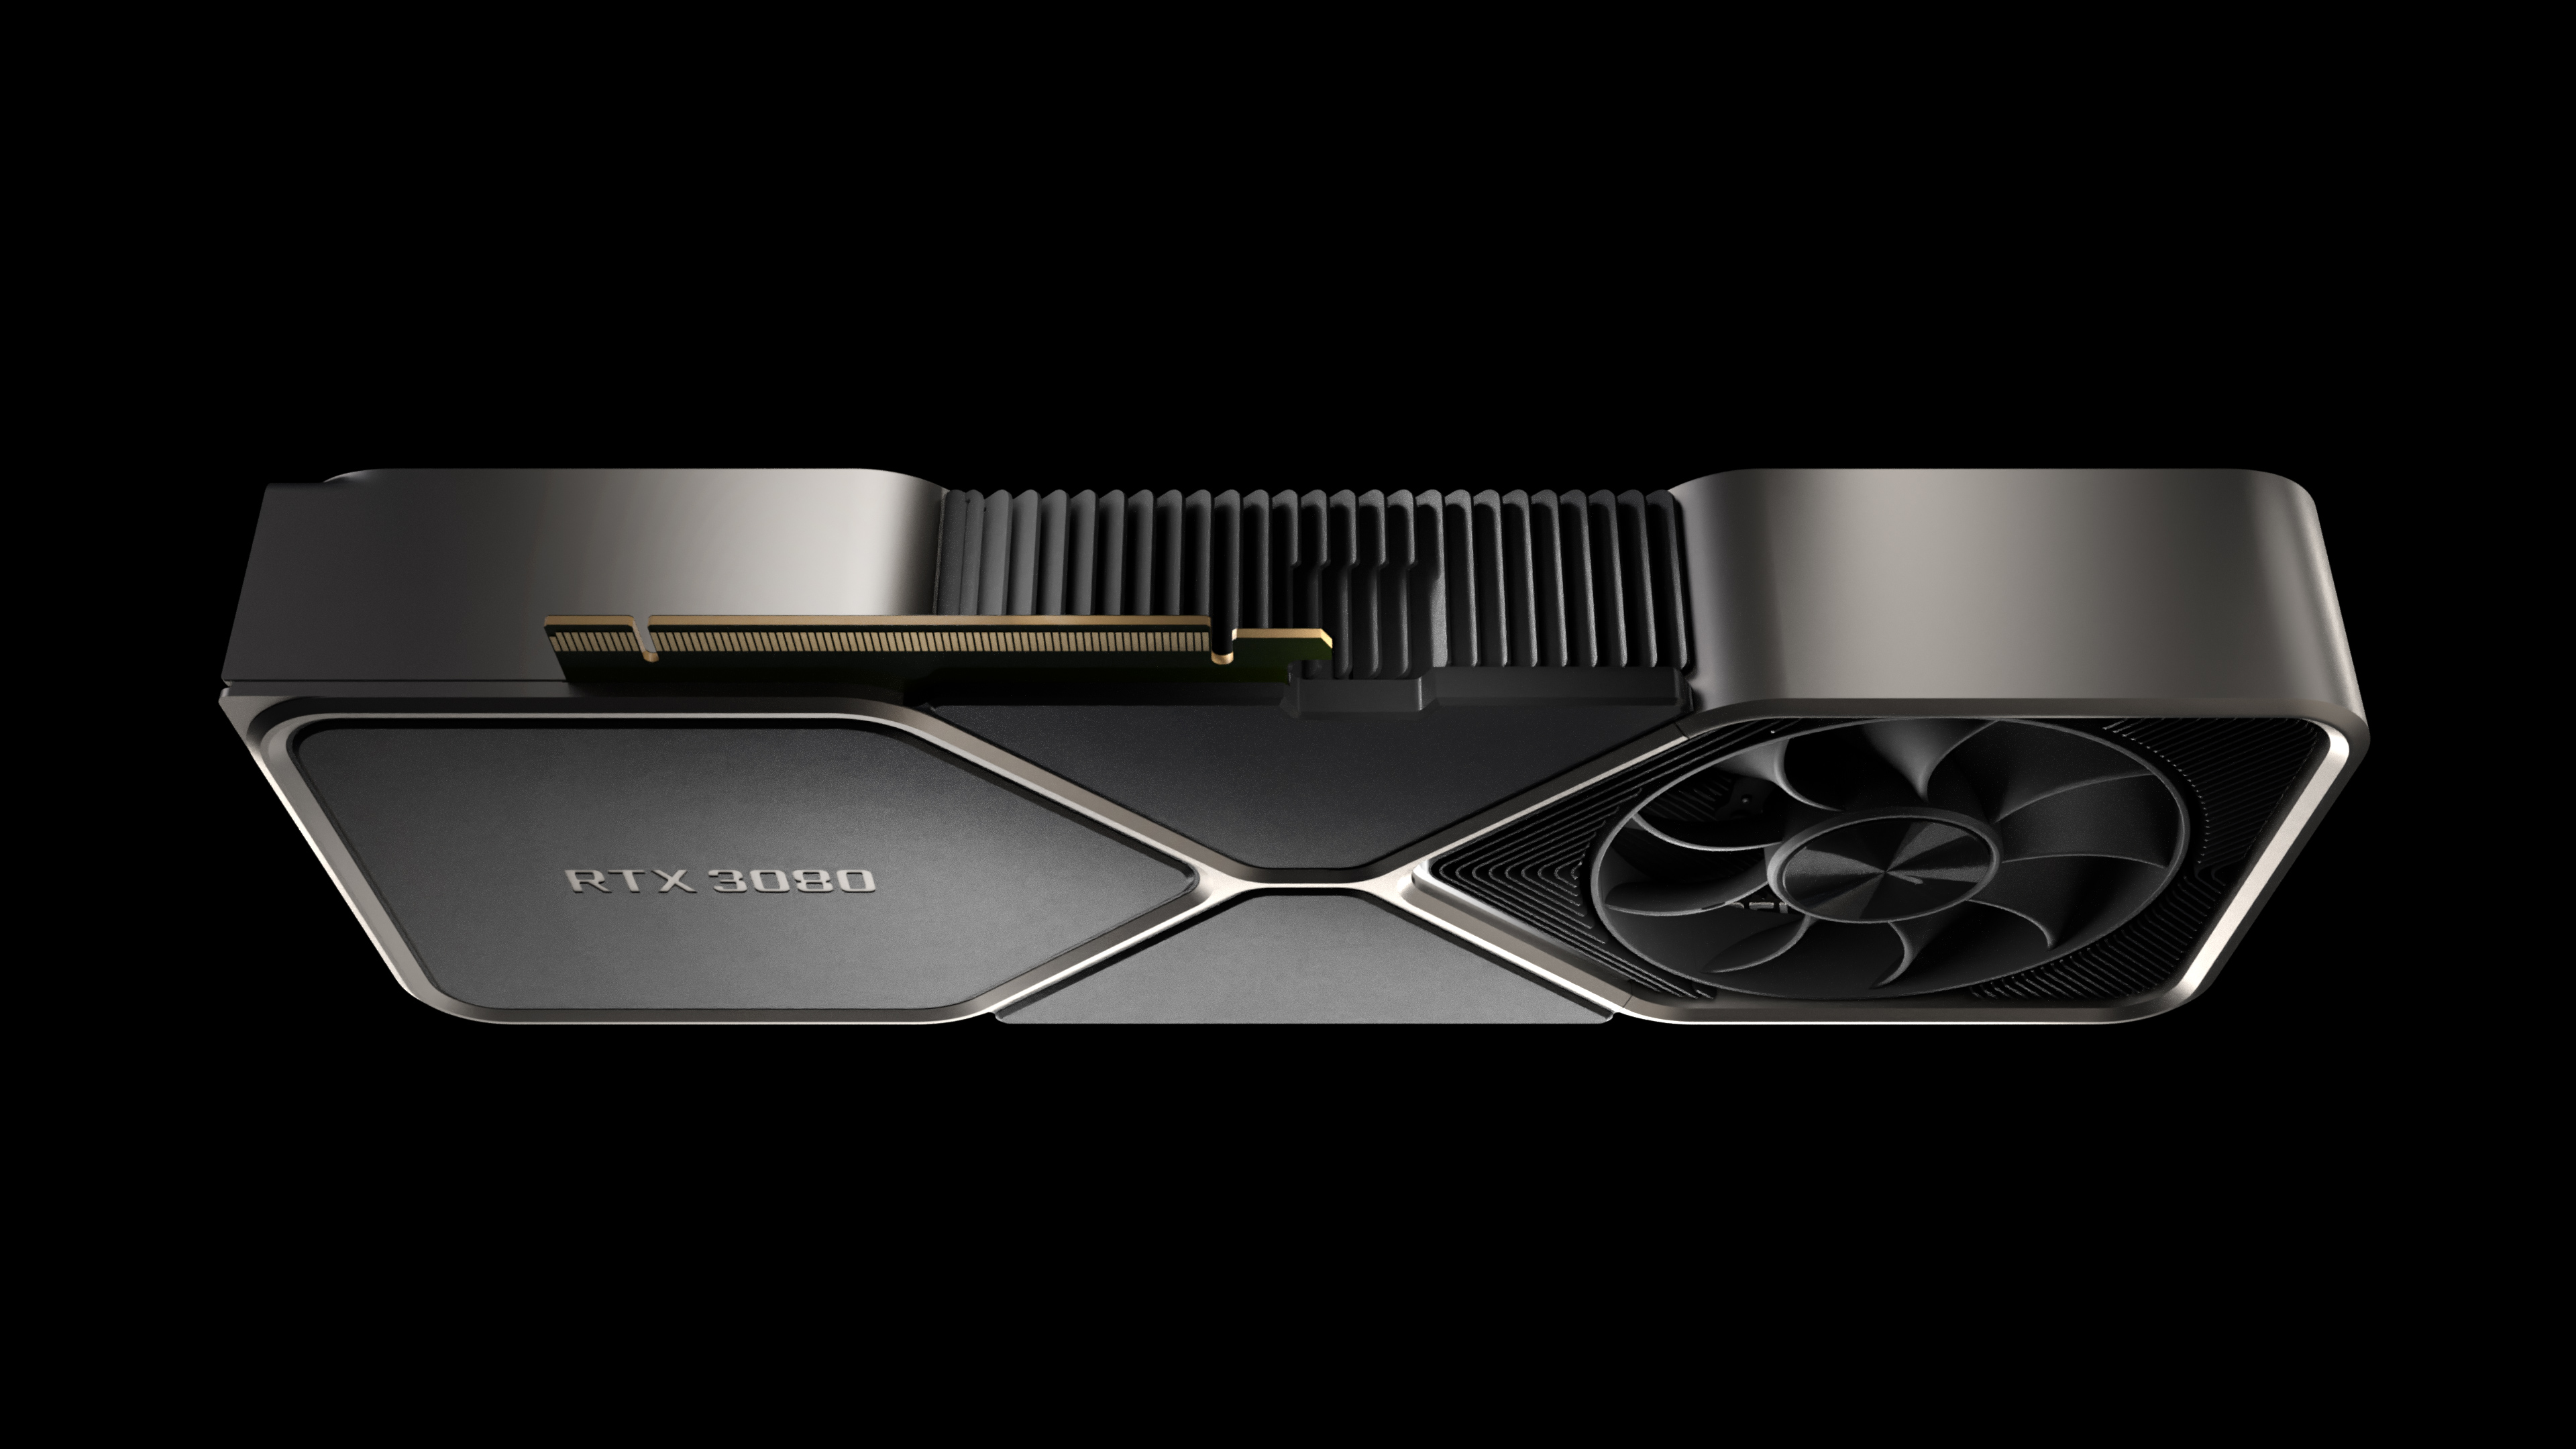  Nvidia Ampere's new flagship RTX 3080 costs just $699, launches September 17 